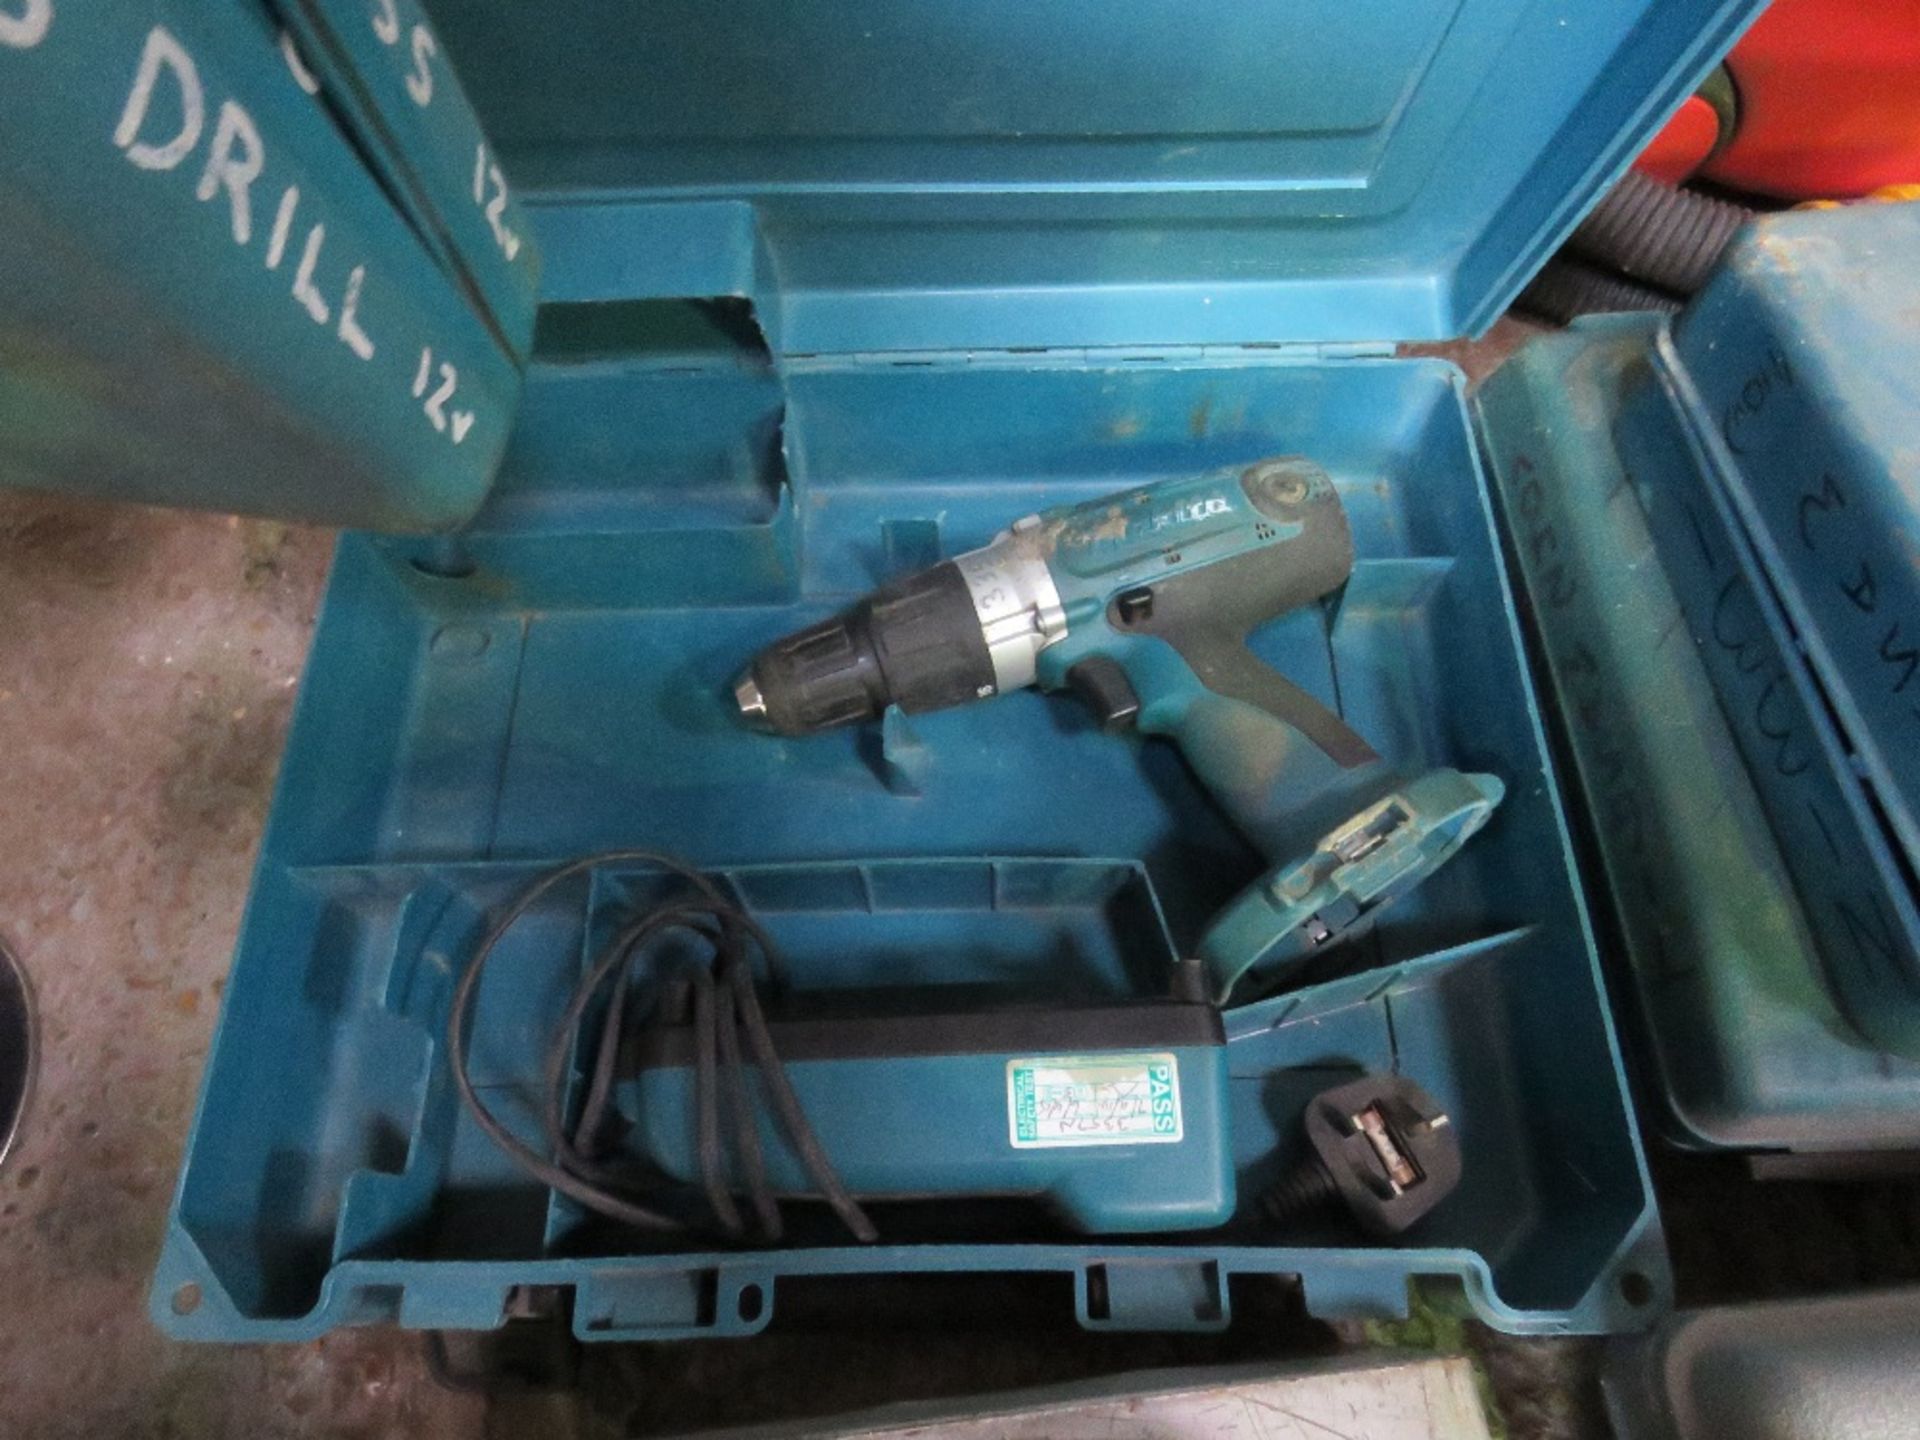 2X MAKITA BATTERY DRILLS SOURCED FROM DEPOT CLEARANCE. - Image 2 of 2